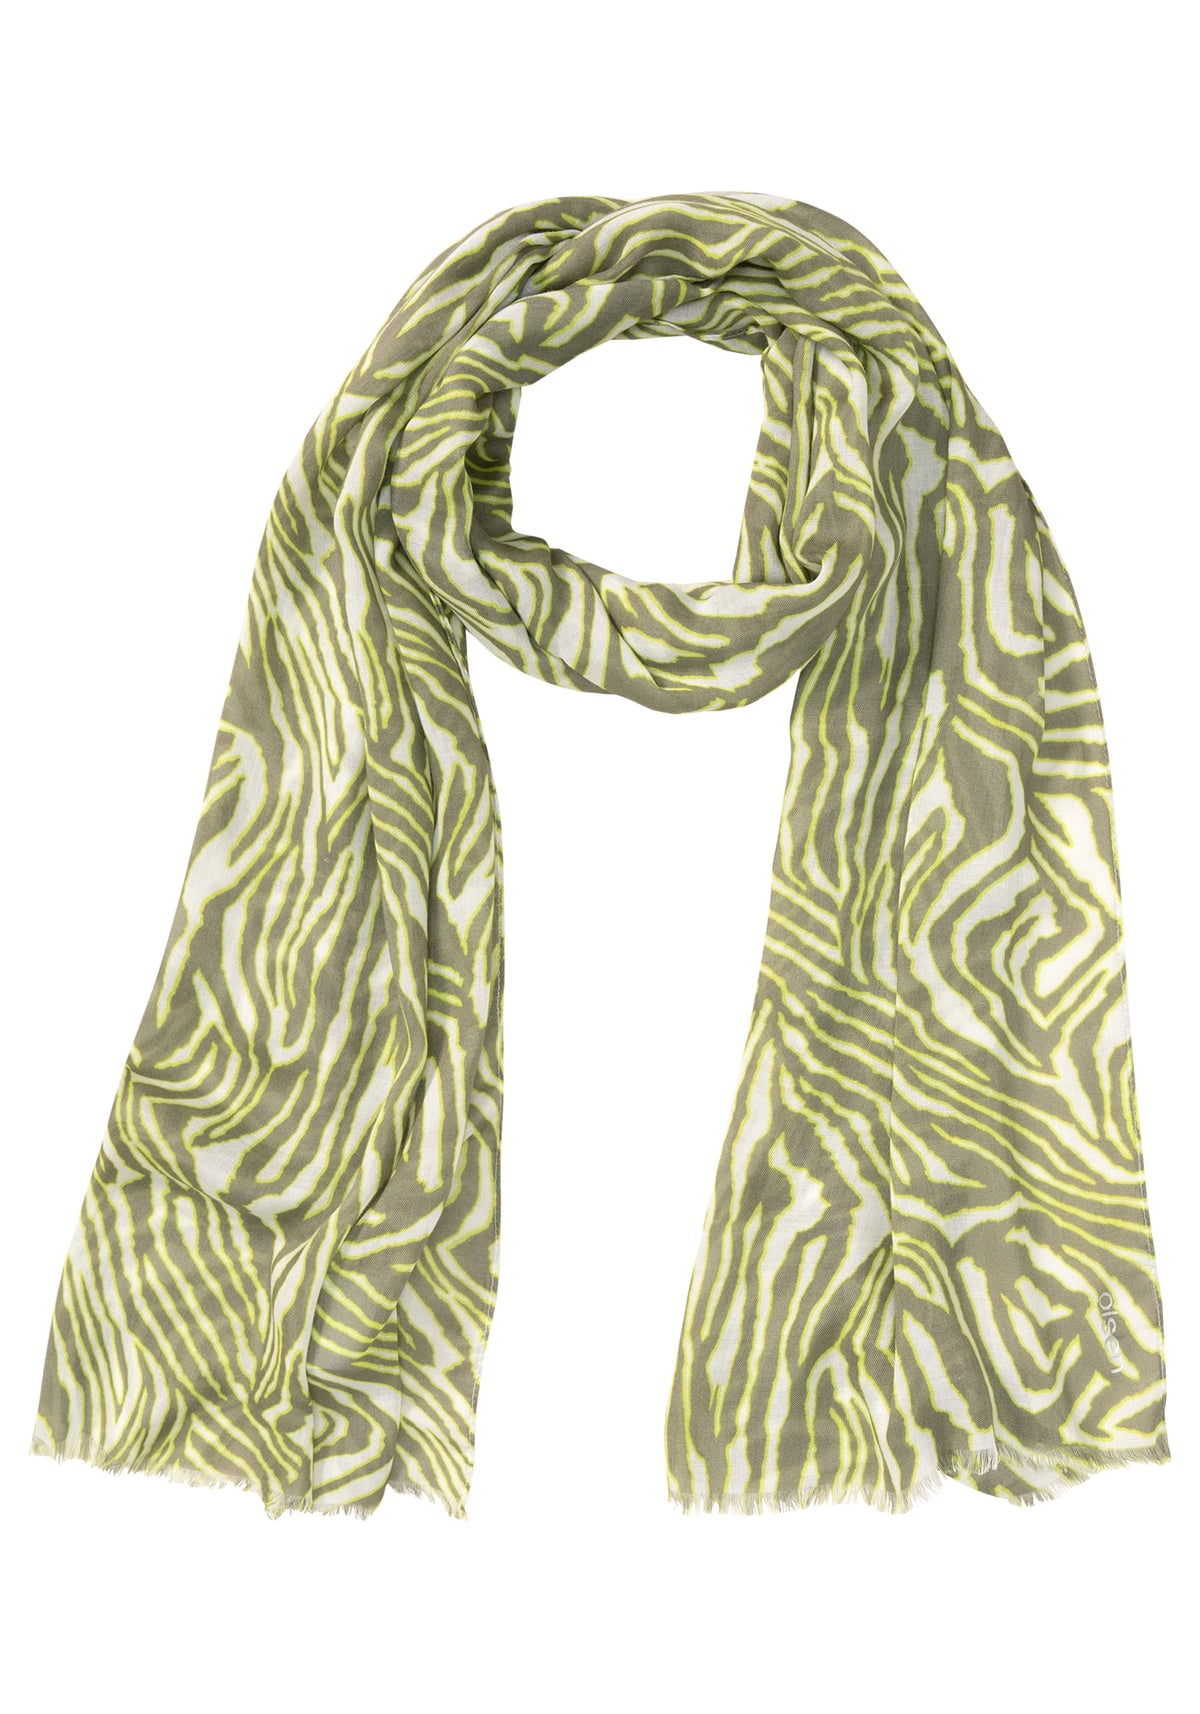 Allover Zebra Print with Scarf with Frayed Edge Trim